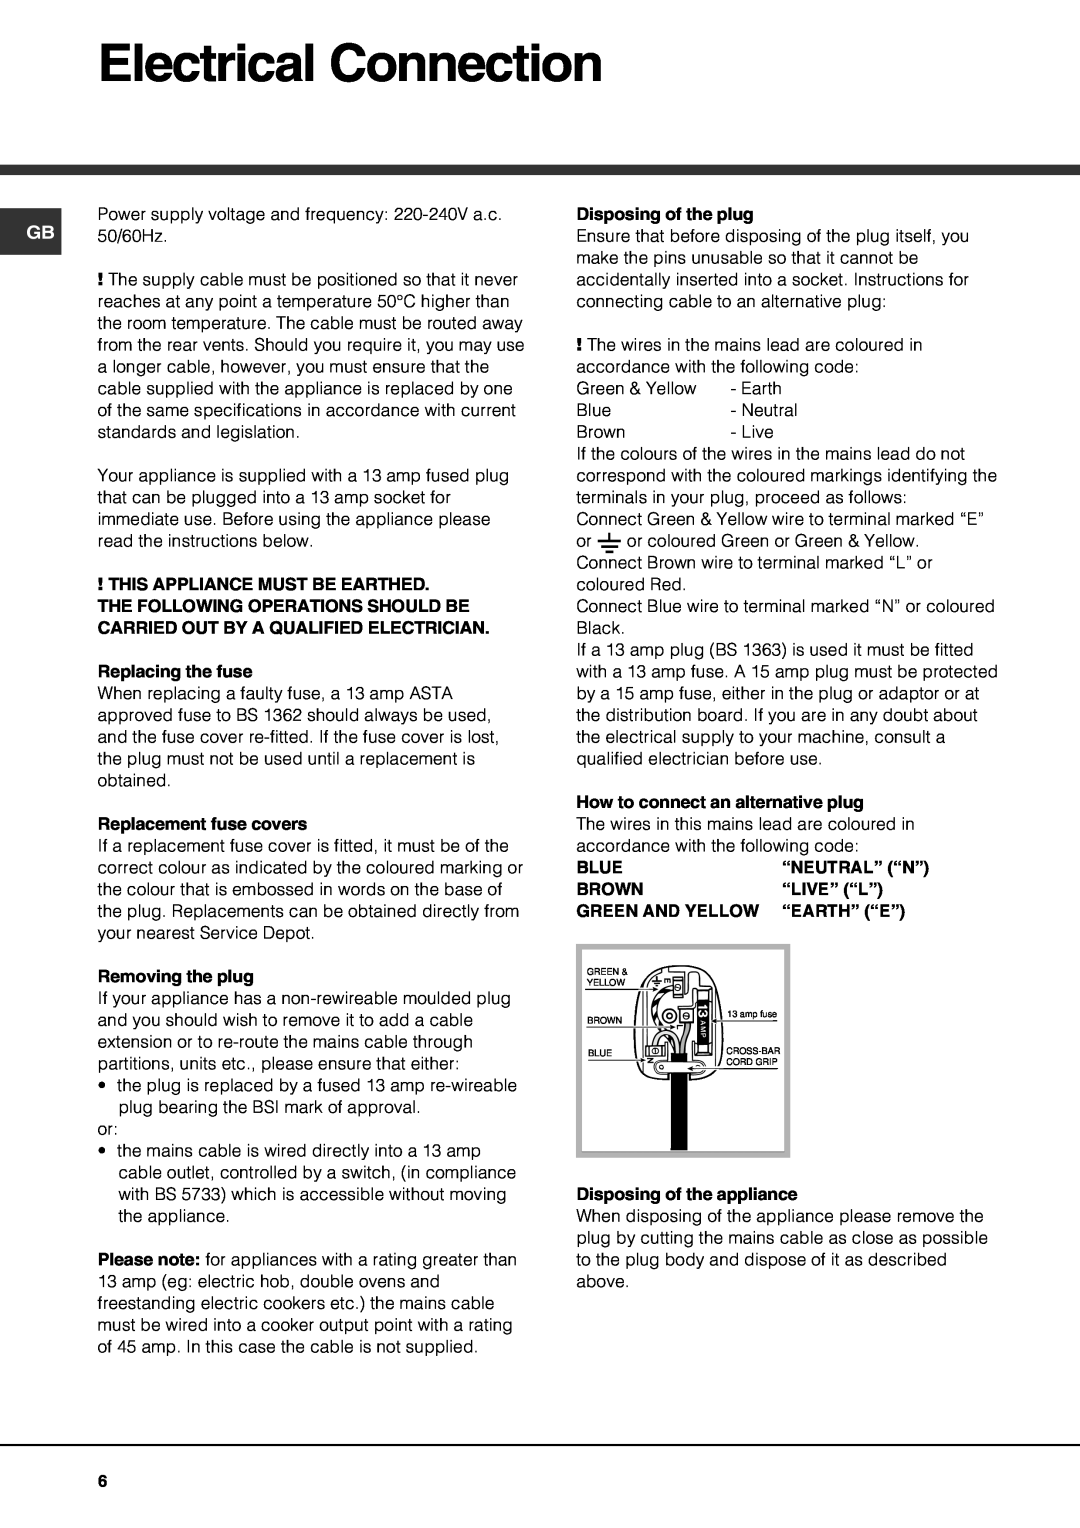 Hotpoint GE750DX operating instructions Electrical Connection 